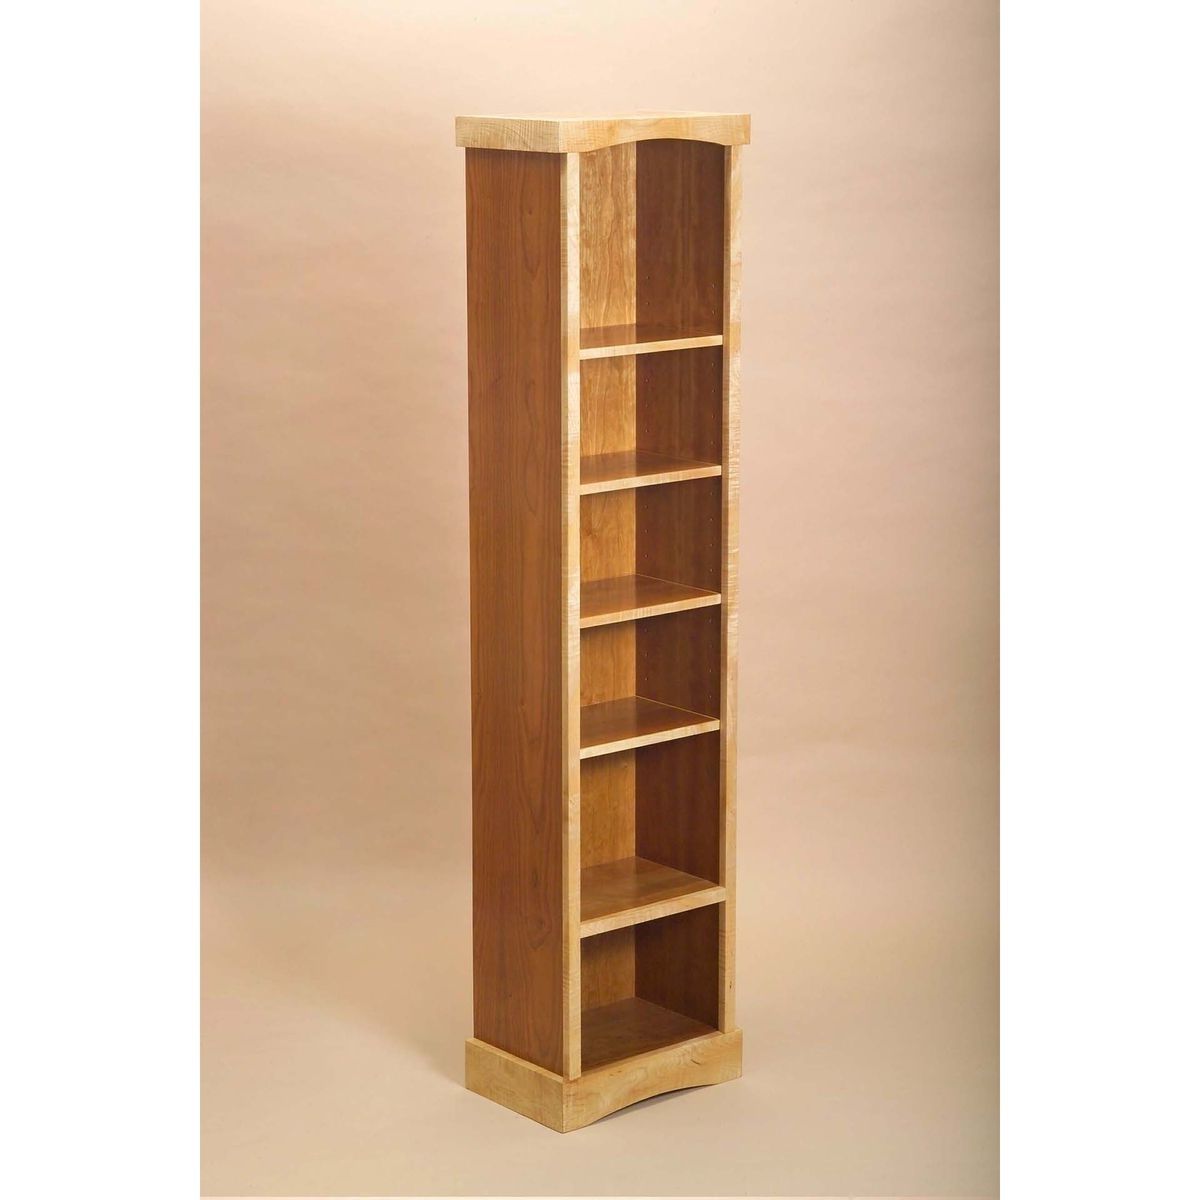 Custommade Intended For Trendy Narrow Tall Bookcases (View 10 of 15)